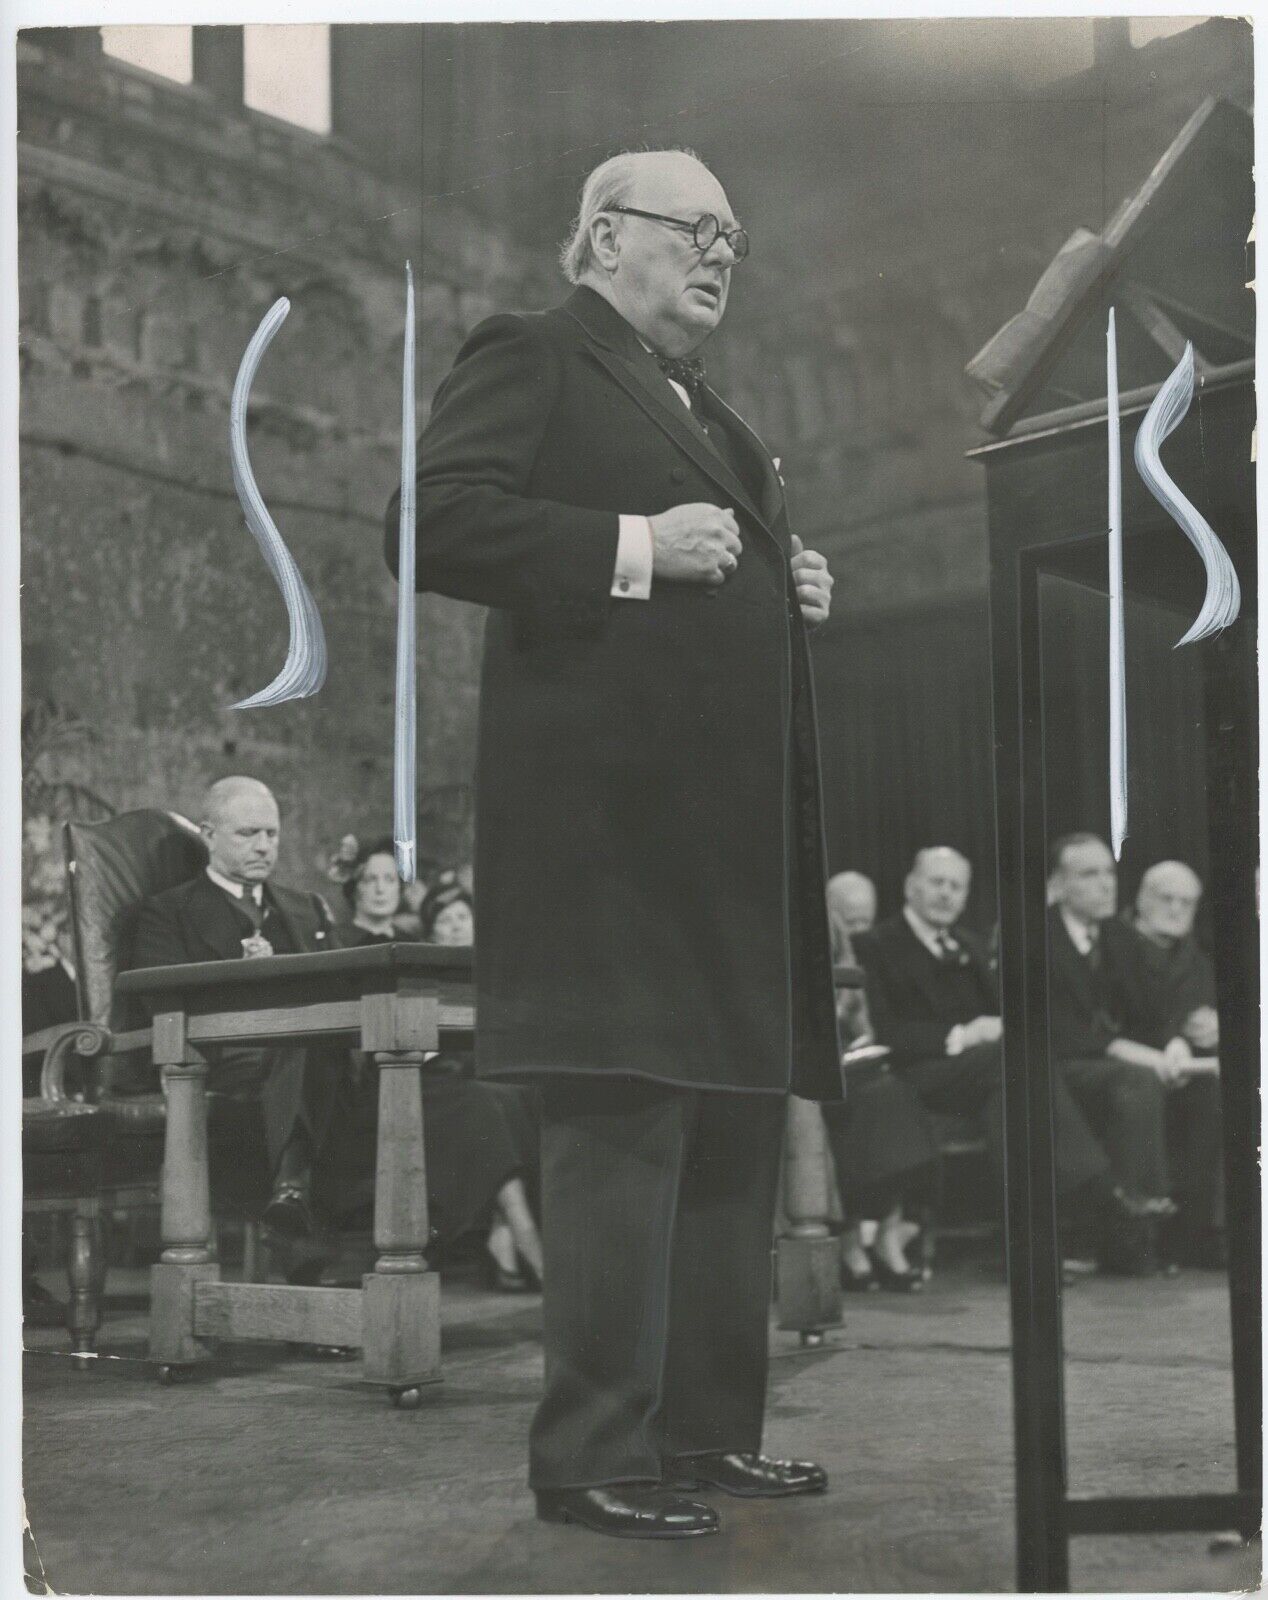 3 February 1949 press photo of Churchill giving a speech in London's Guildhall